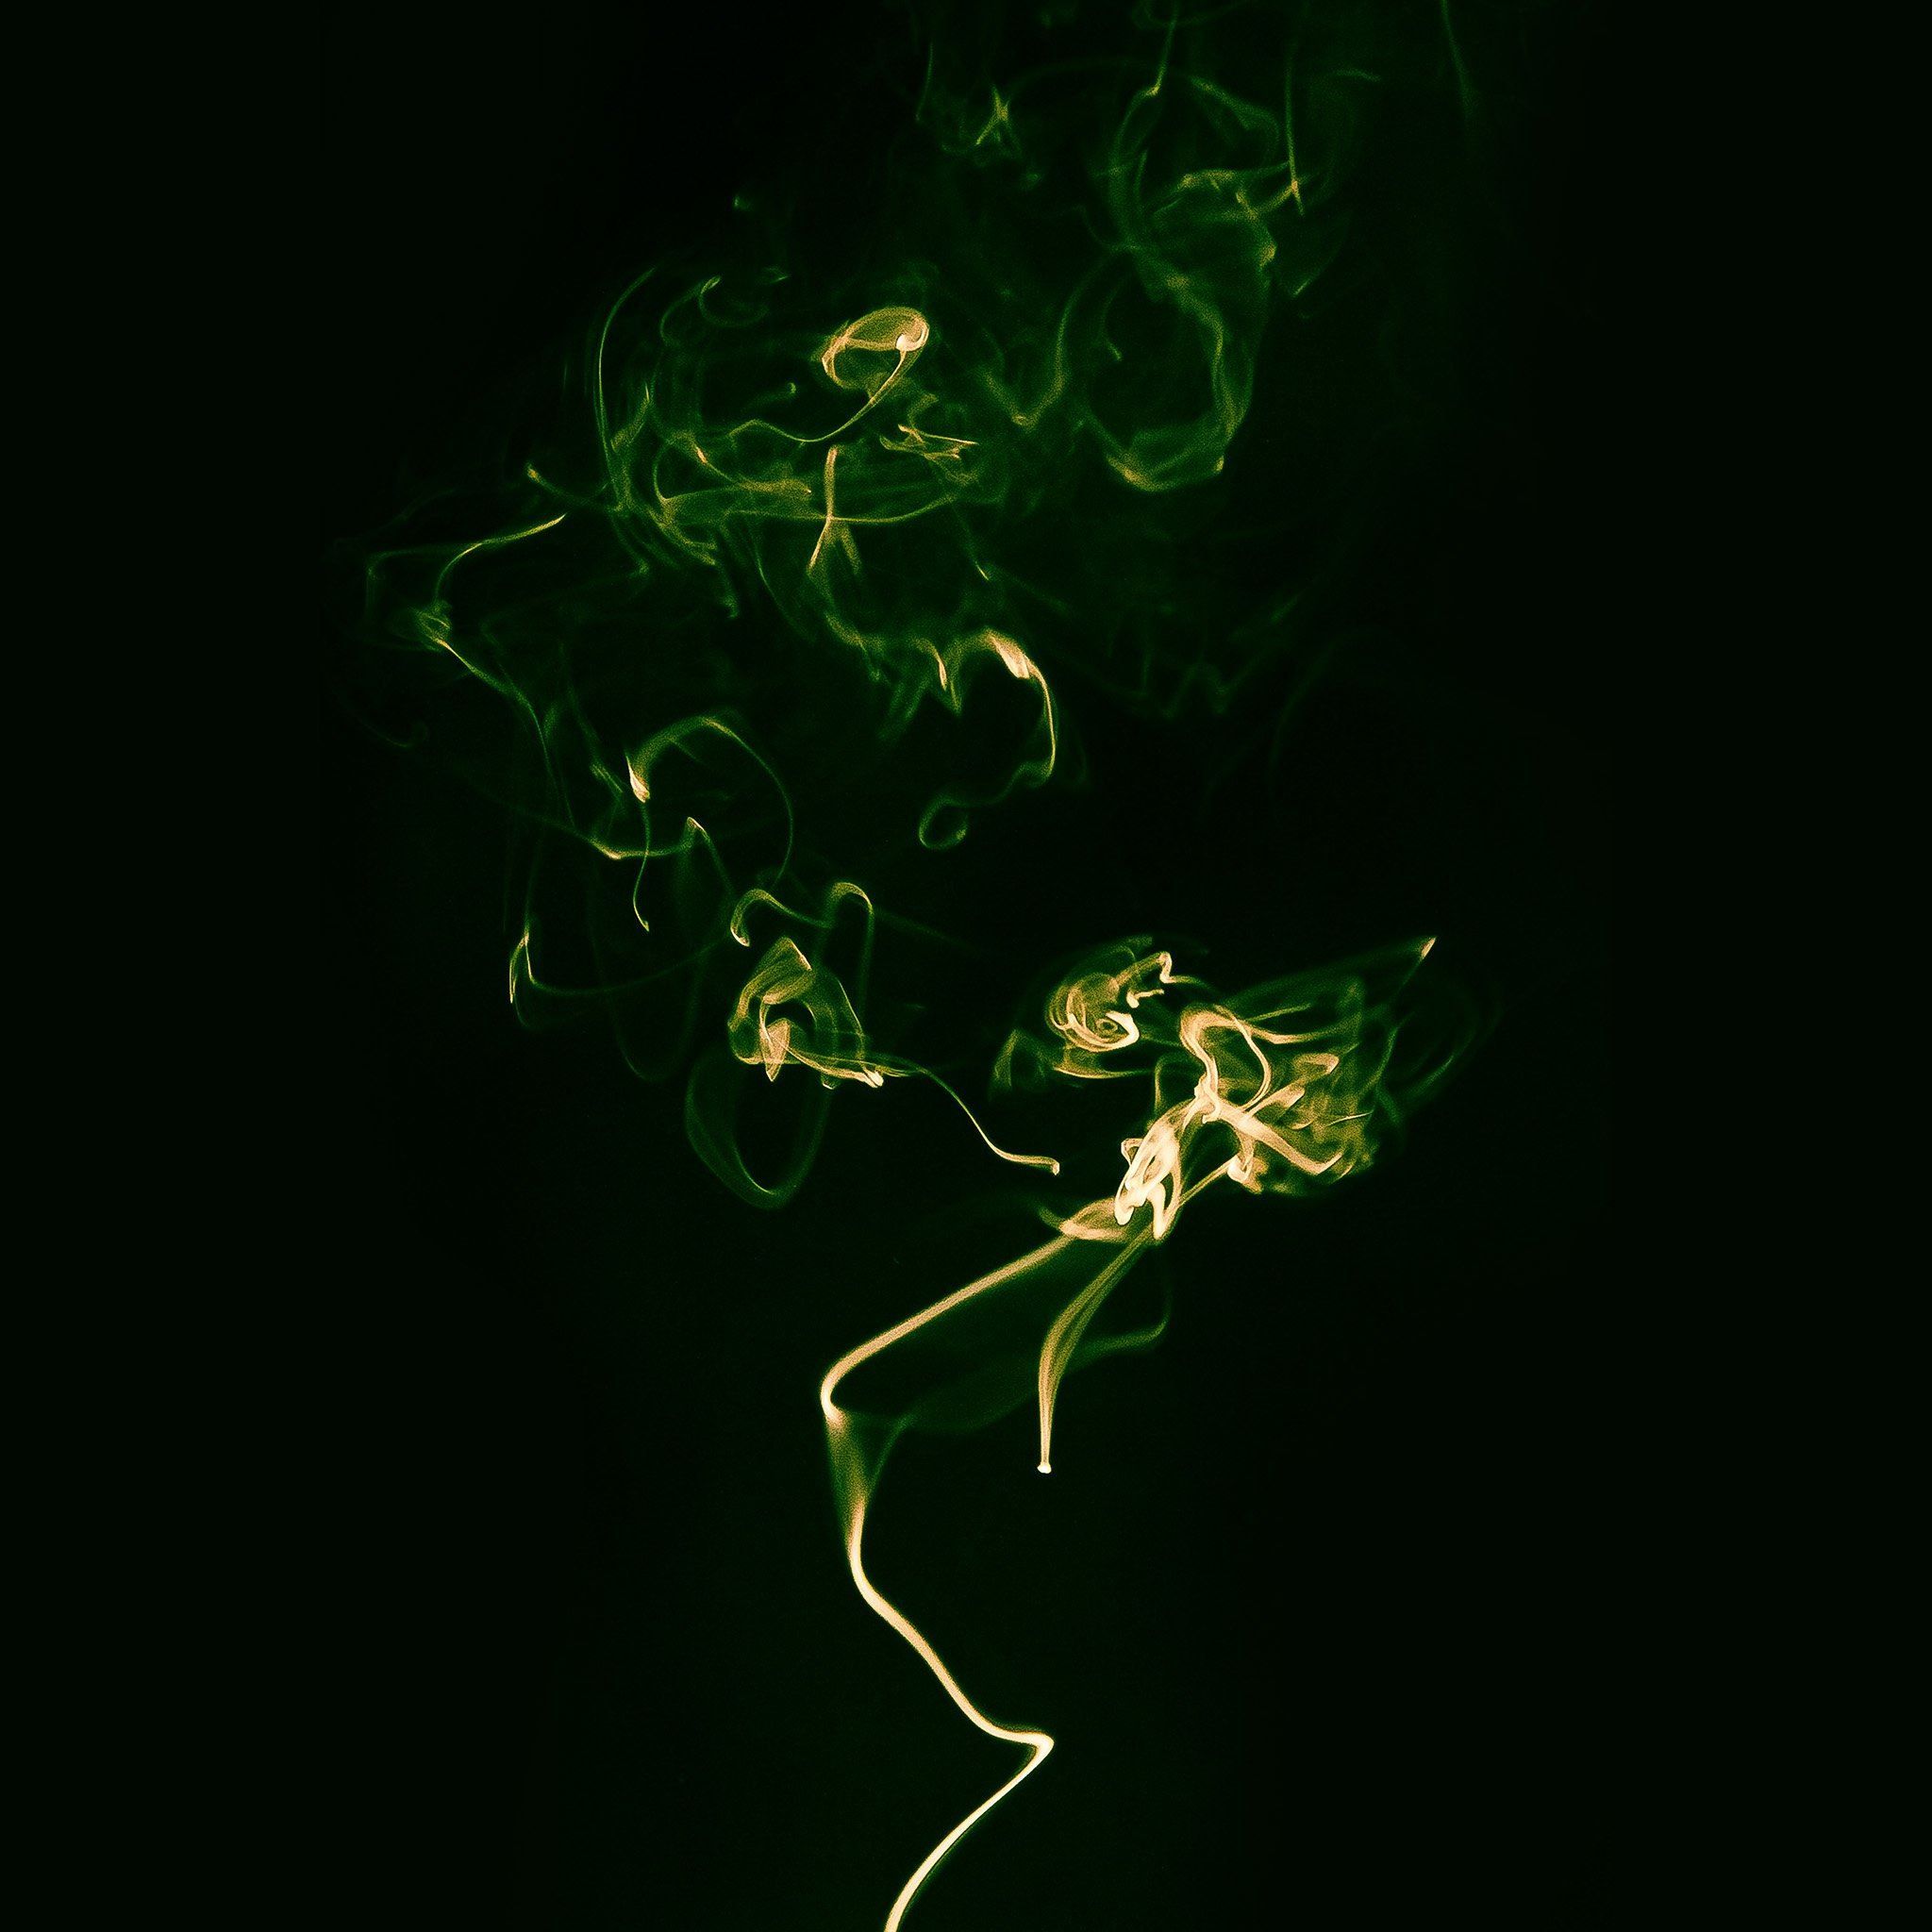 A green and gold photograph of smoke rising against a black background - Green, dark green